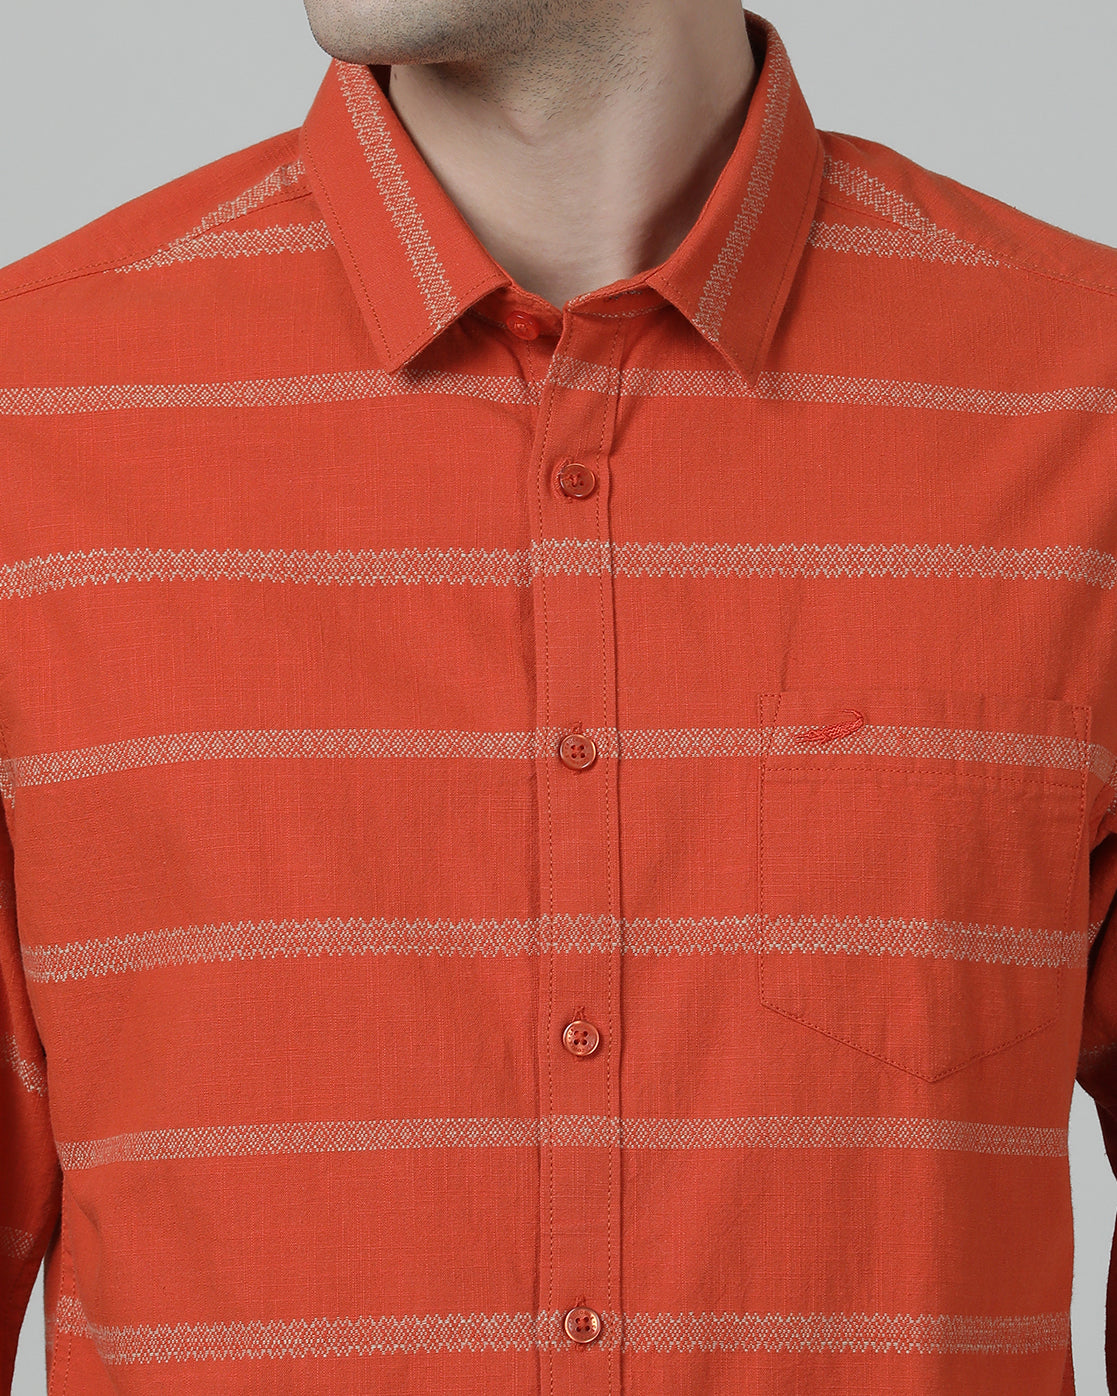 Casual Stripe Comfort Fit Full Sleeve Orange Shirt with Collar